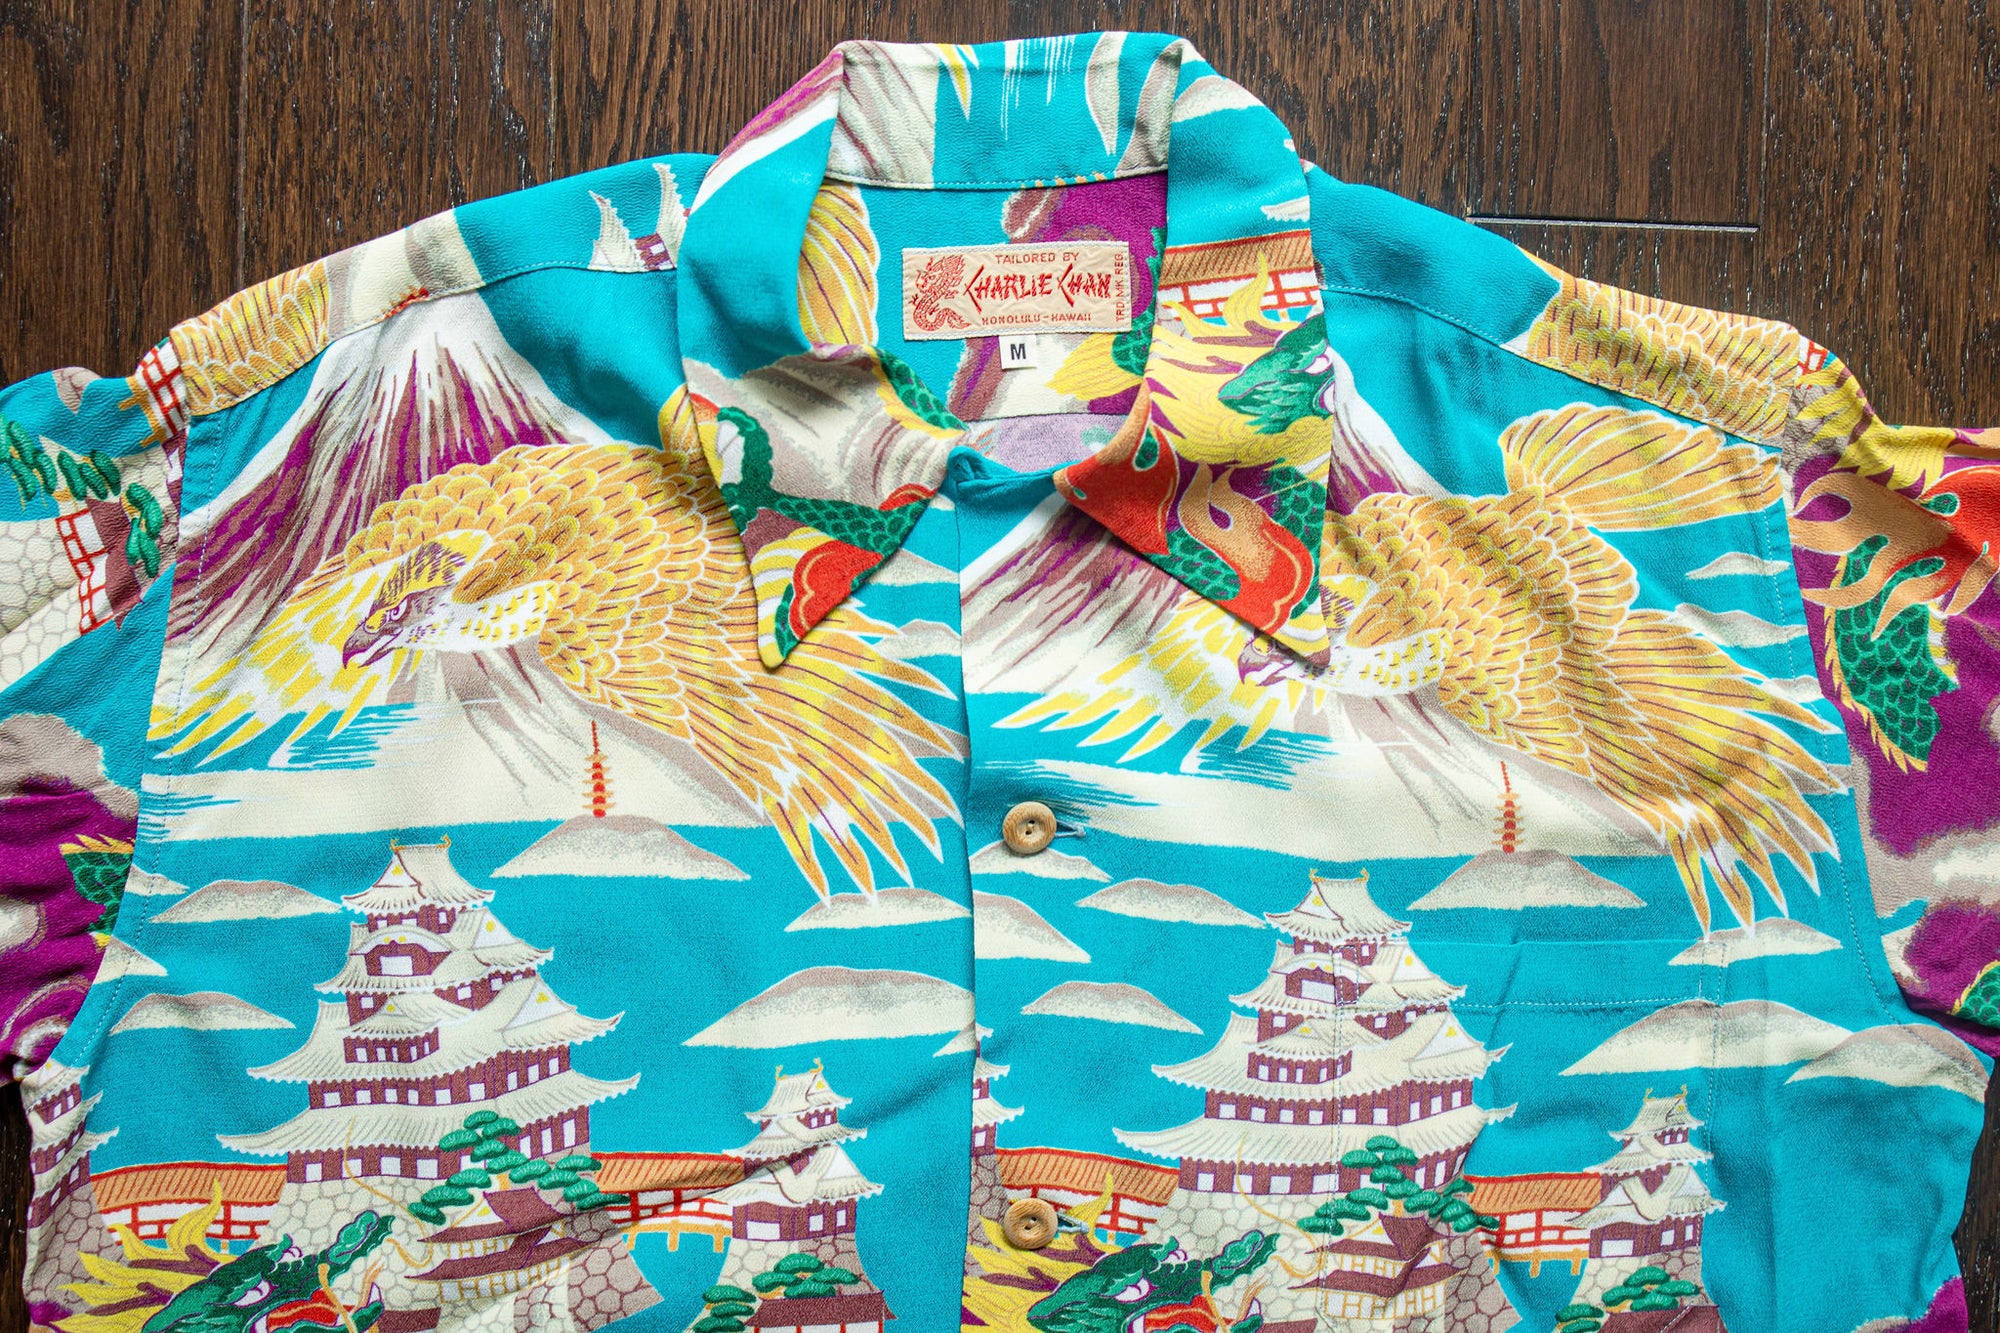 Sun Surf Special Edition "Legendary Hawaii" - Turquoise